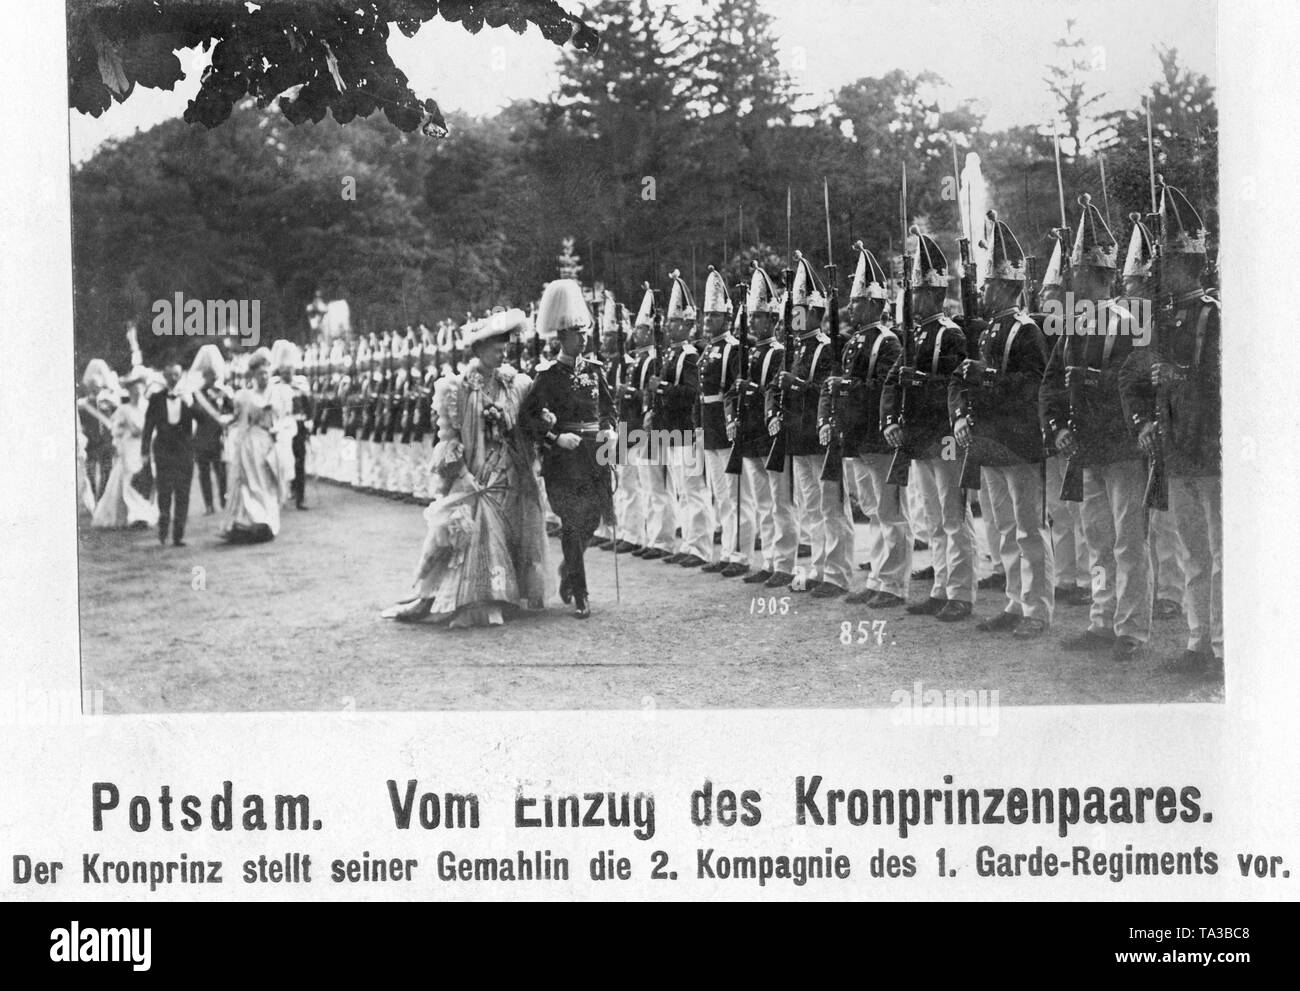 Before the final entry of the Crown Prince and Princess into the Potsdam City Palace, their future summer residence, Crown Prince Wilhelm (right front) introduces the 2nd Company of the 1st Guards Regiment to his wife Crown Princess Cecilie (front left). Stock Photo